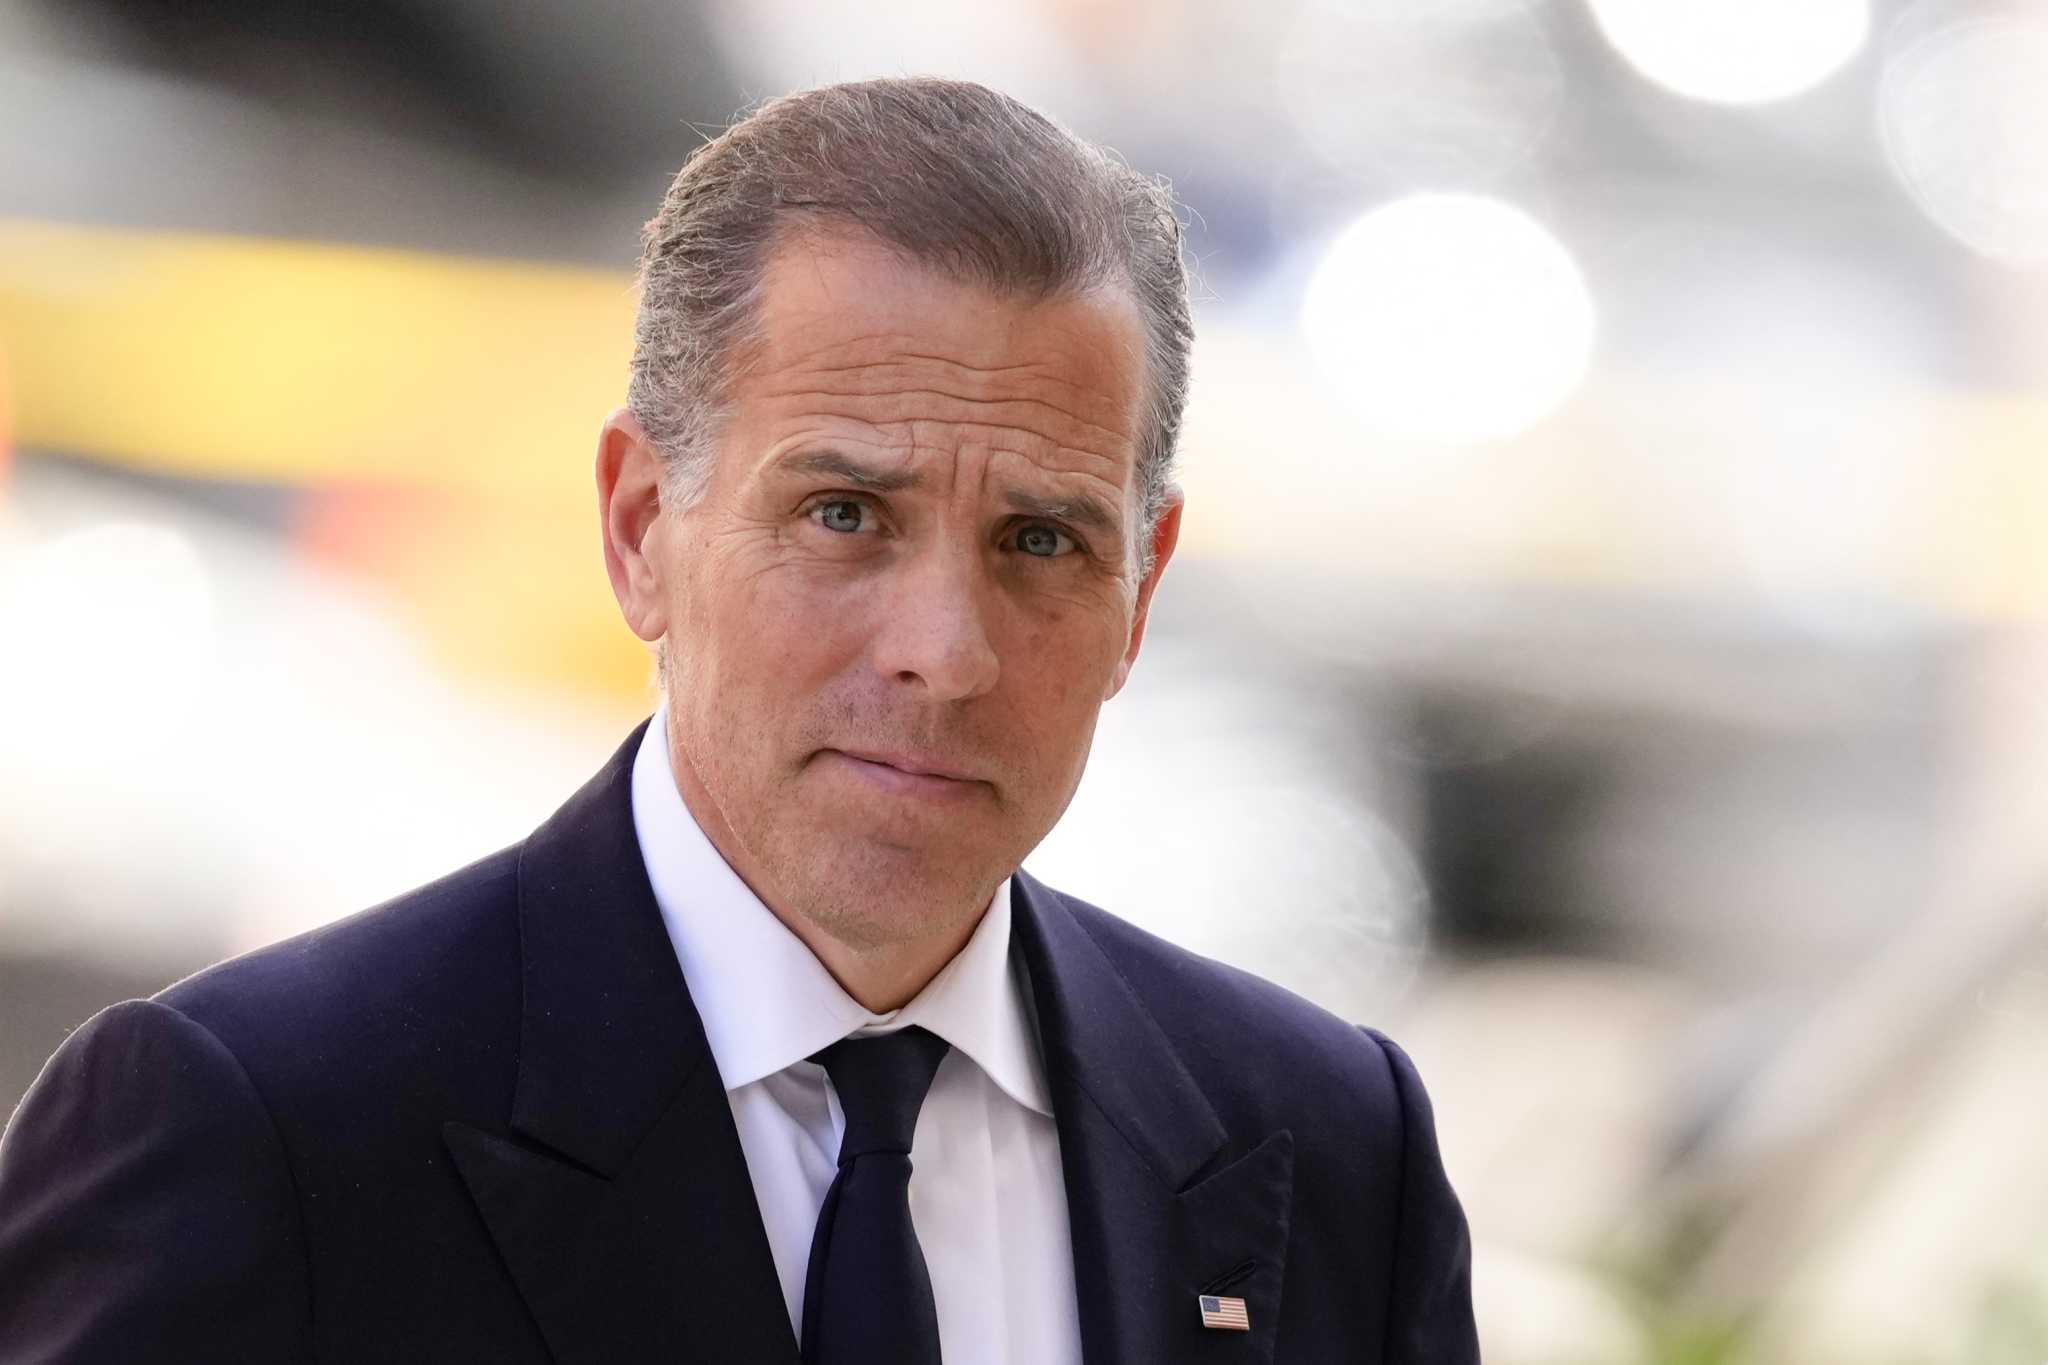 Back from France, the first lady attends Hunter Biden's gun trial as prosecution wraps up